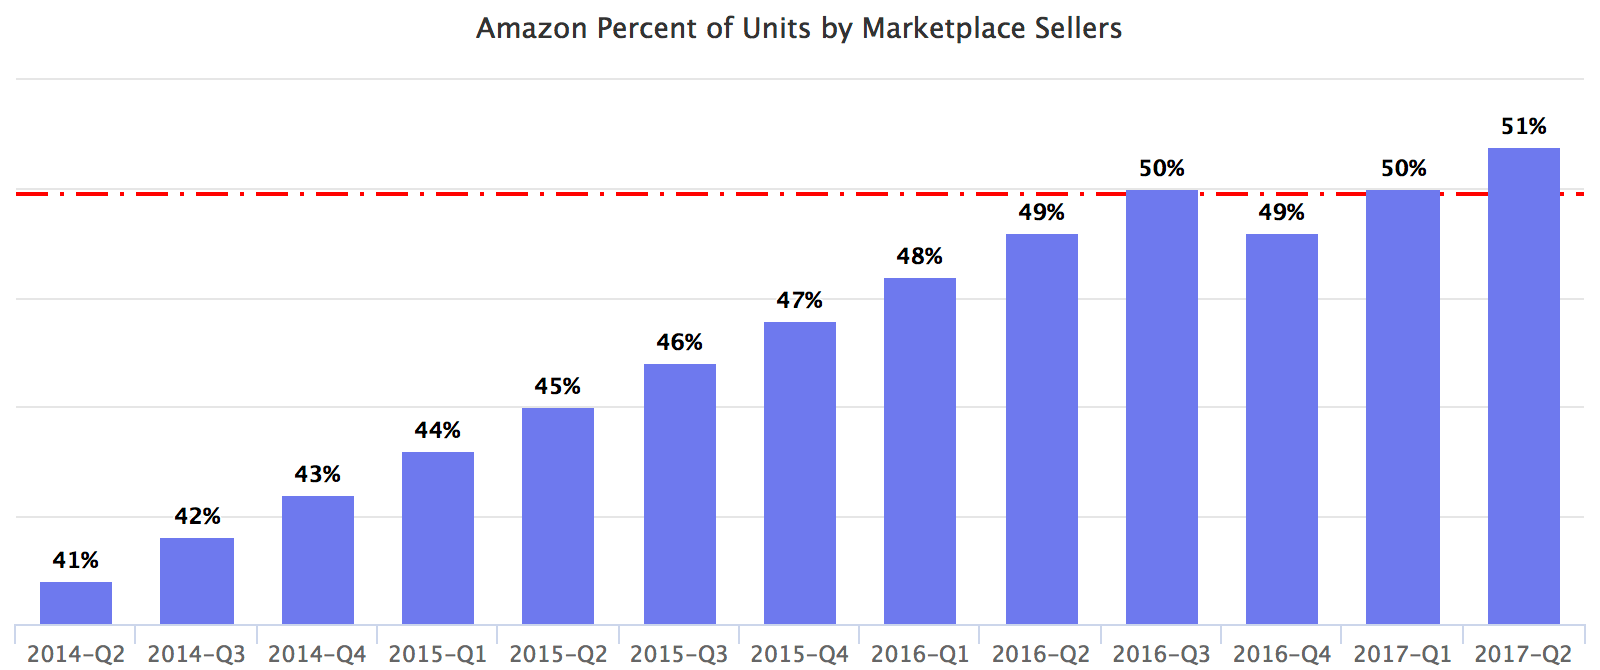 Amazon Percent of Units by Marketplace Sellers